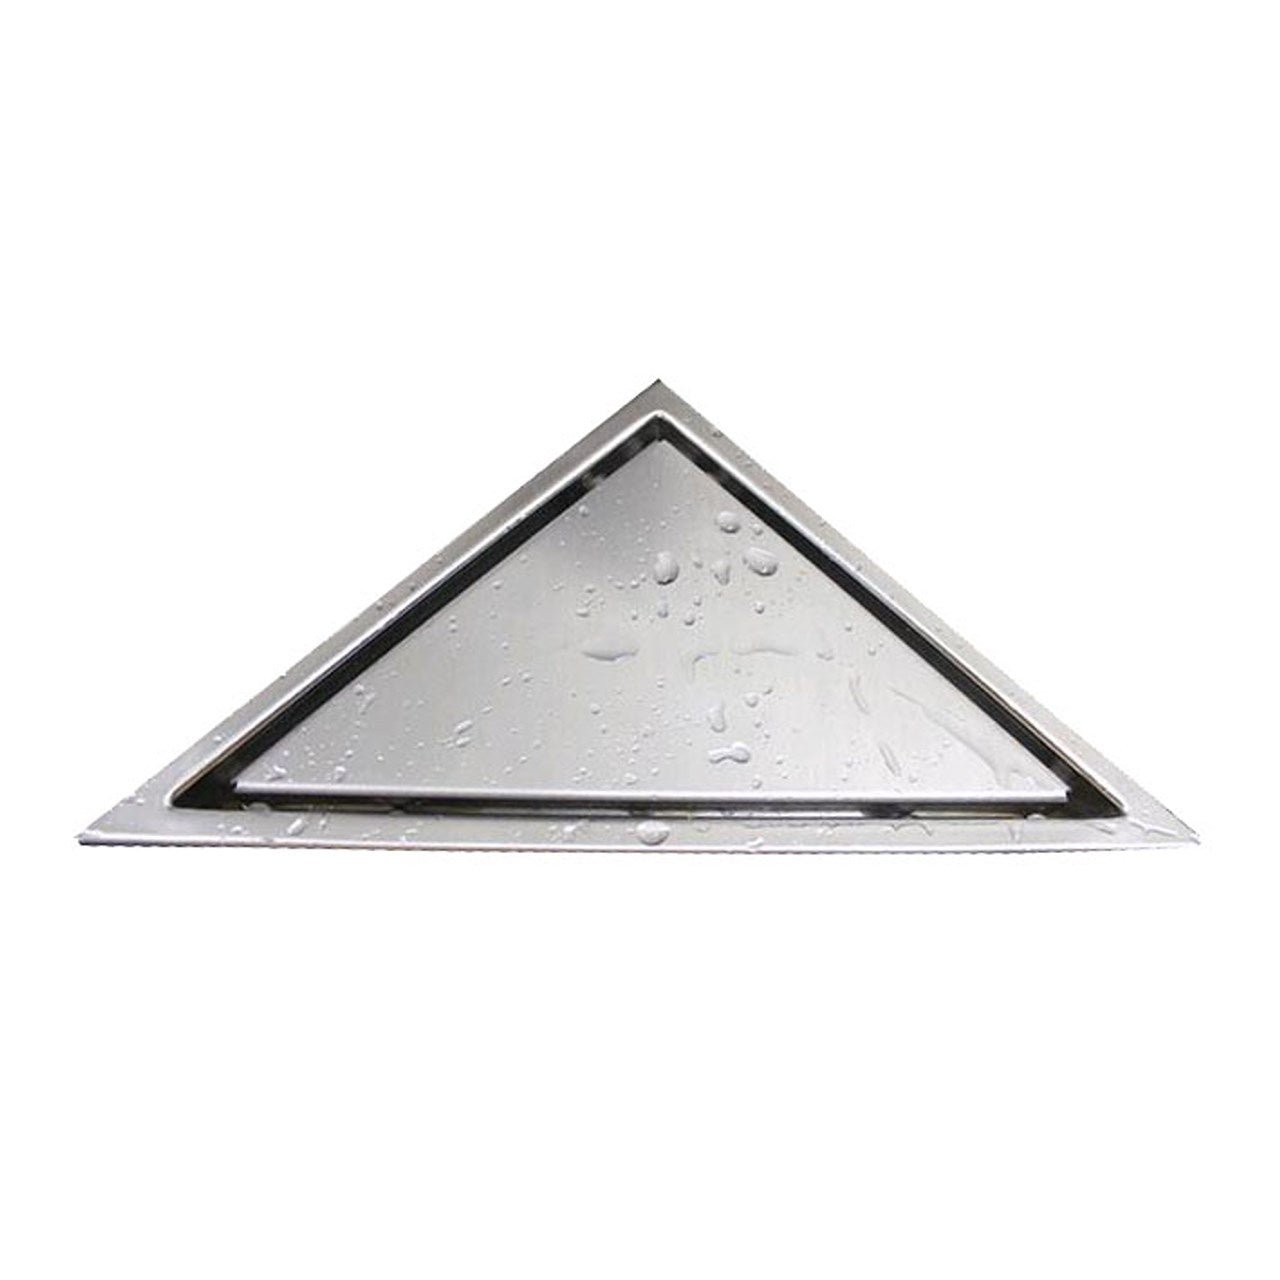 Kube 6.5″ Triangle Stainless Steel Tile Grate - Bhdepot 